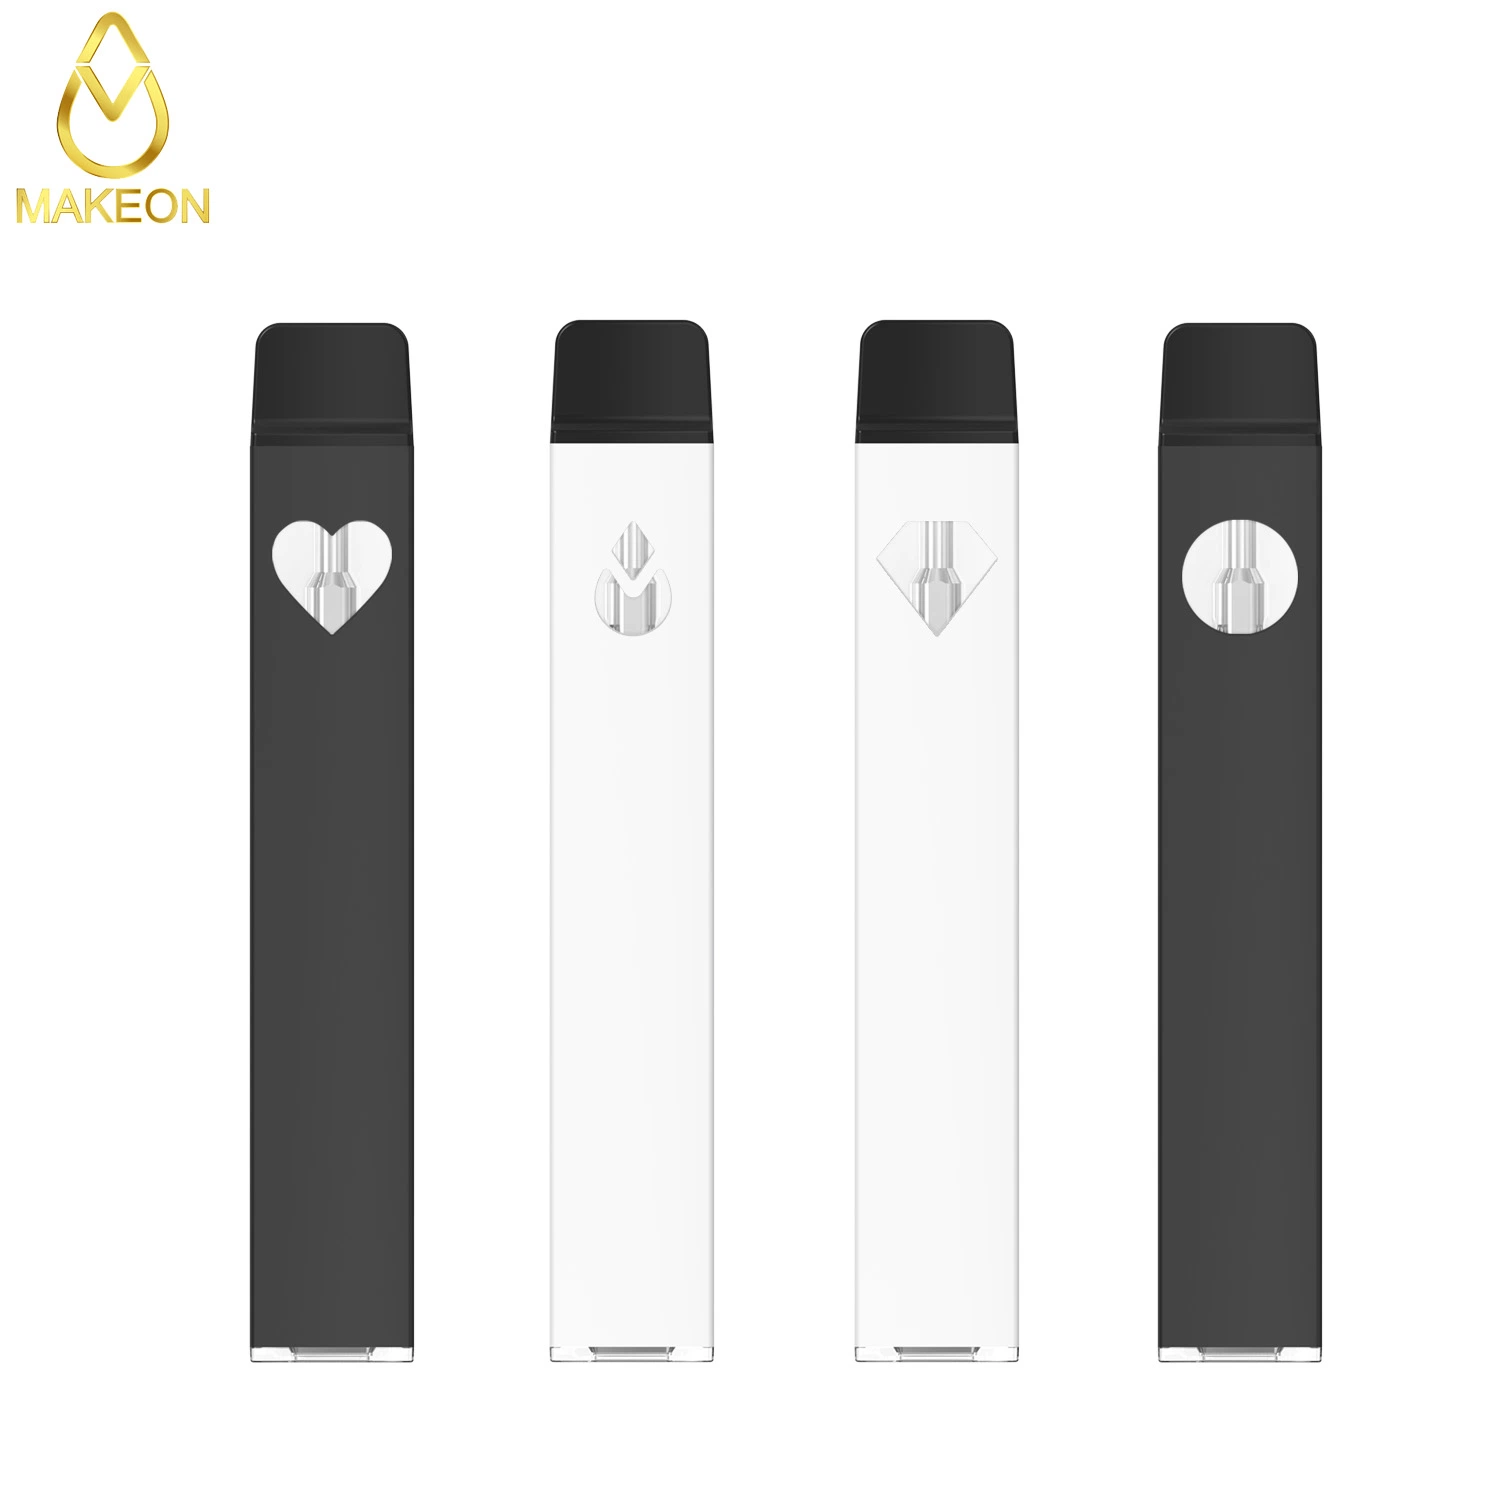 Makeon D9 Empty 0.5ml Tank Thick Oil Disposable Vape Pod System Pen-Style Mini Ecigarette with Rechargeable Battery OEM Packaging